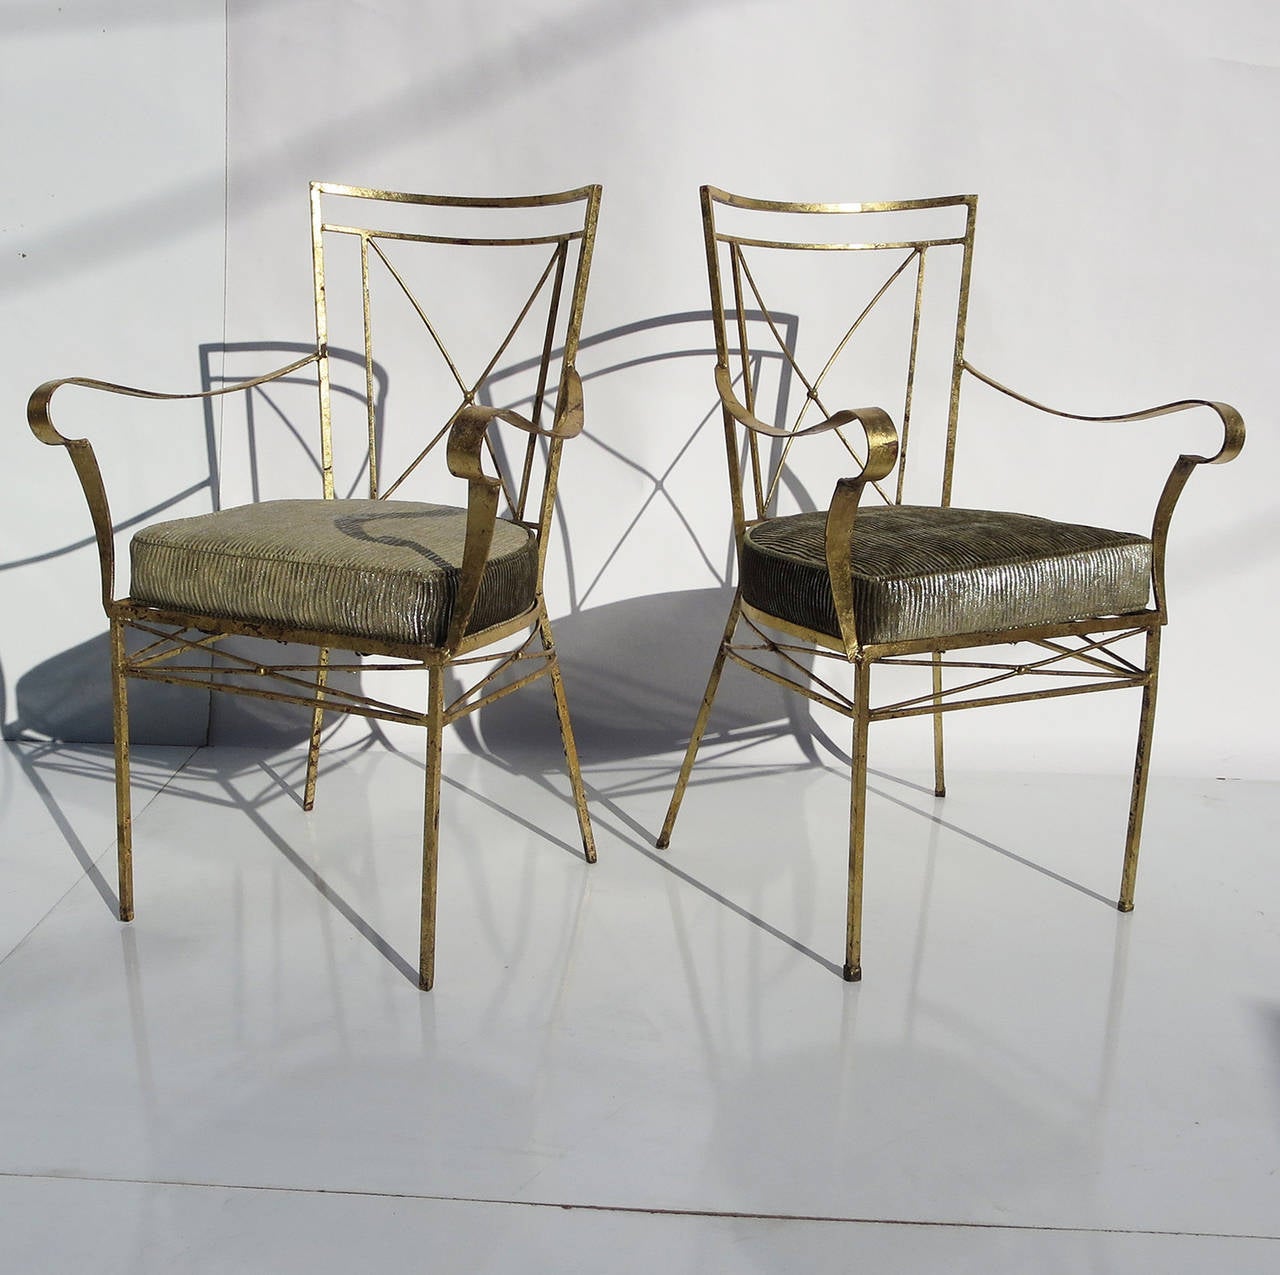 This lovely pair could be equally blended into a modern or traditional setting, and look perfect in either venue. The frames are formed iron, and finished in a distressed gold leafing. The cushions were recently replaced with a wonderful metallic